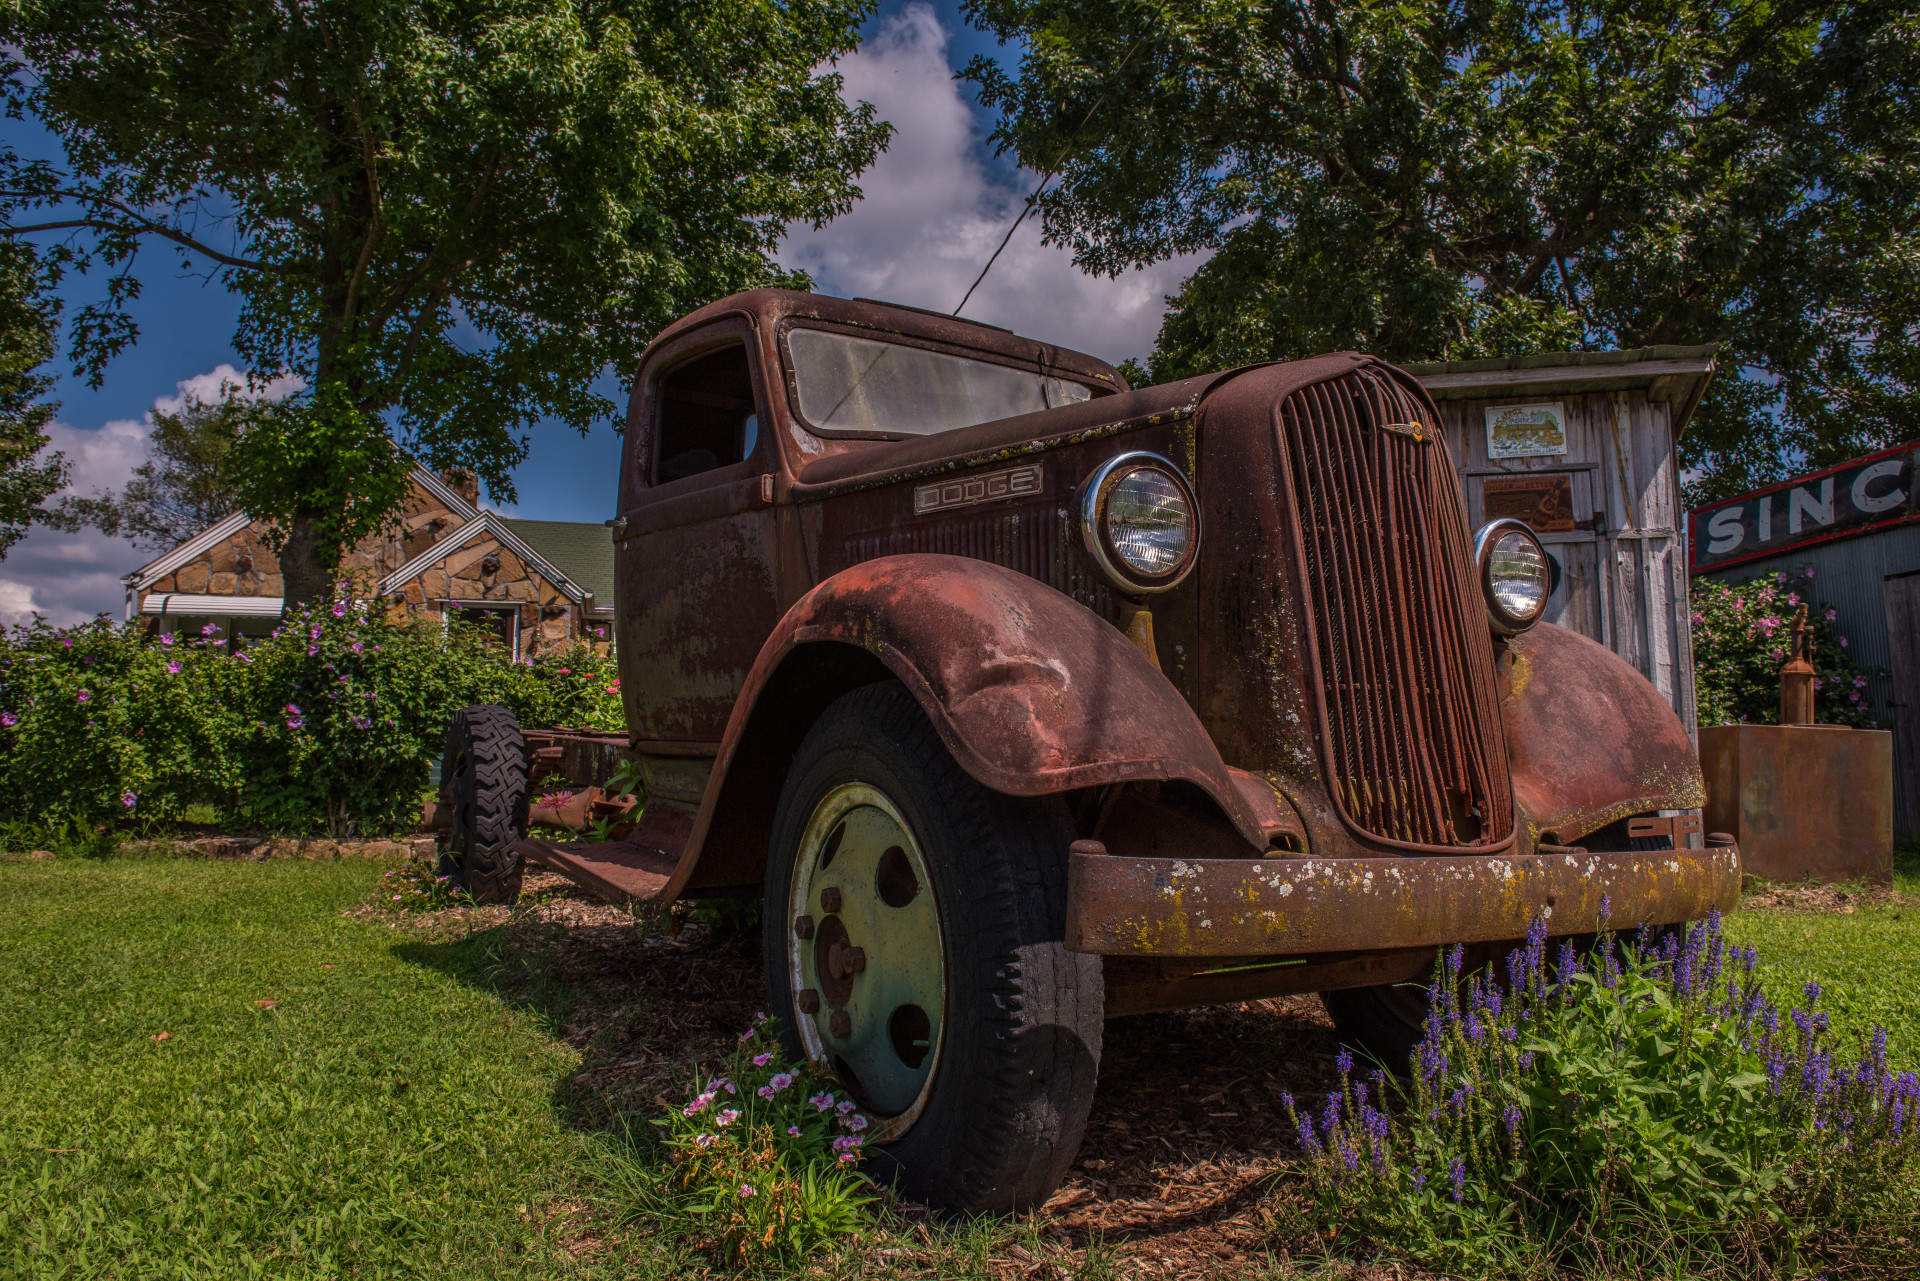 A rusty pickup outside Gary's Gay Parita, a historically restored gas station located near Ash Grove.